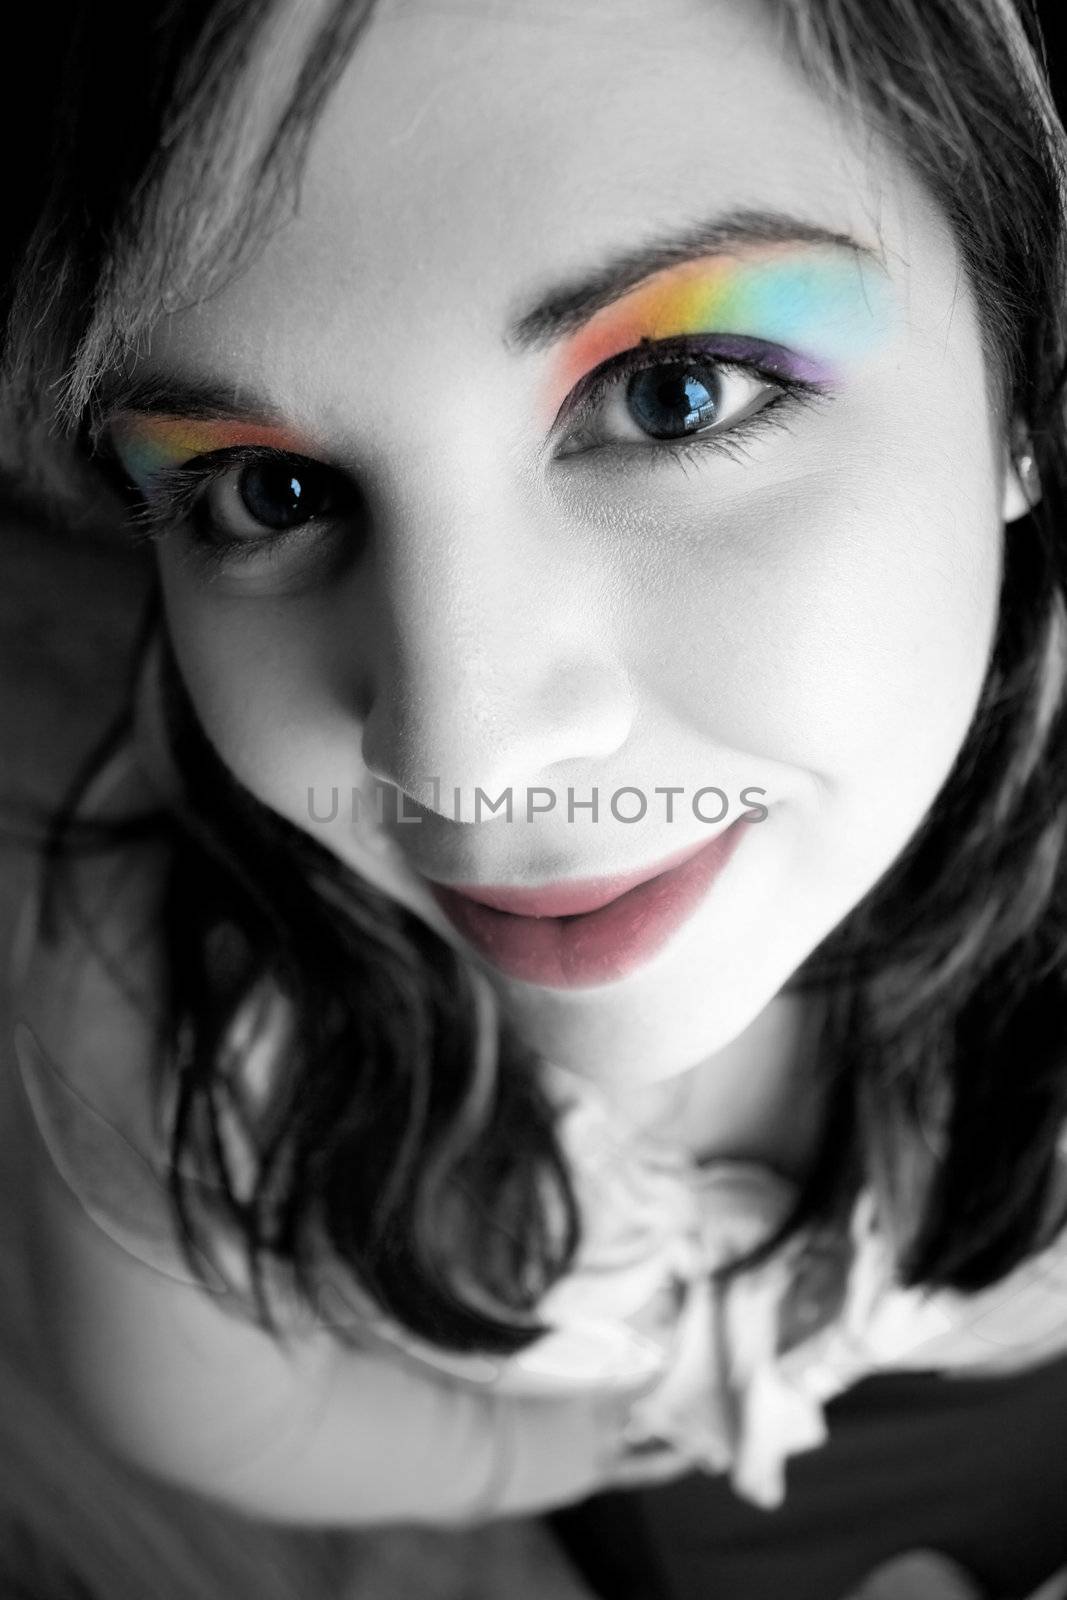 Portrait of a beautiful young womans face close up with rainbow eyeshadow makeup.  Shallow depth of field.